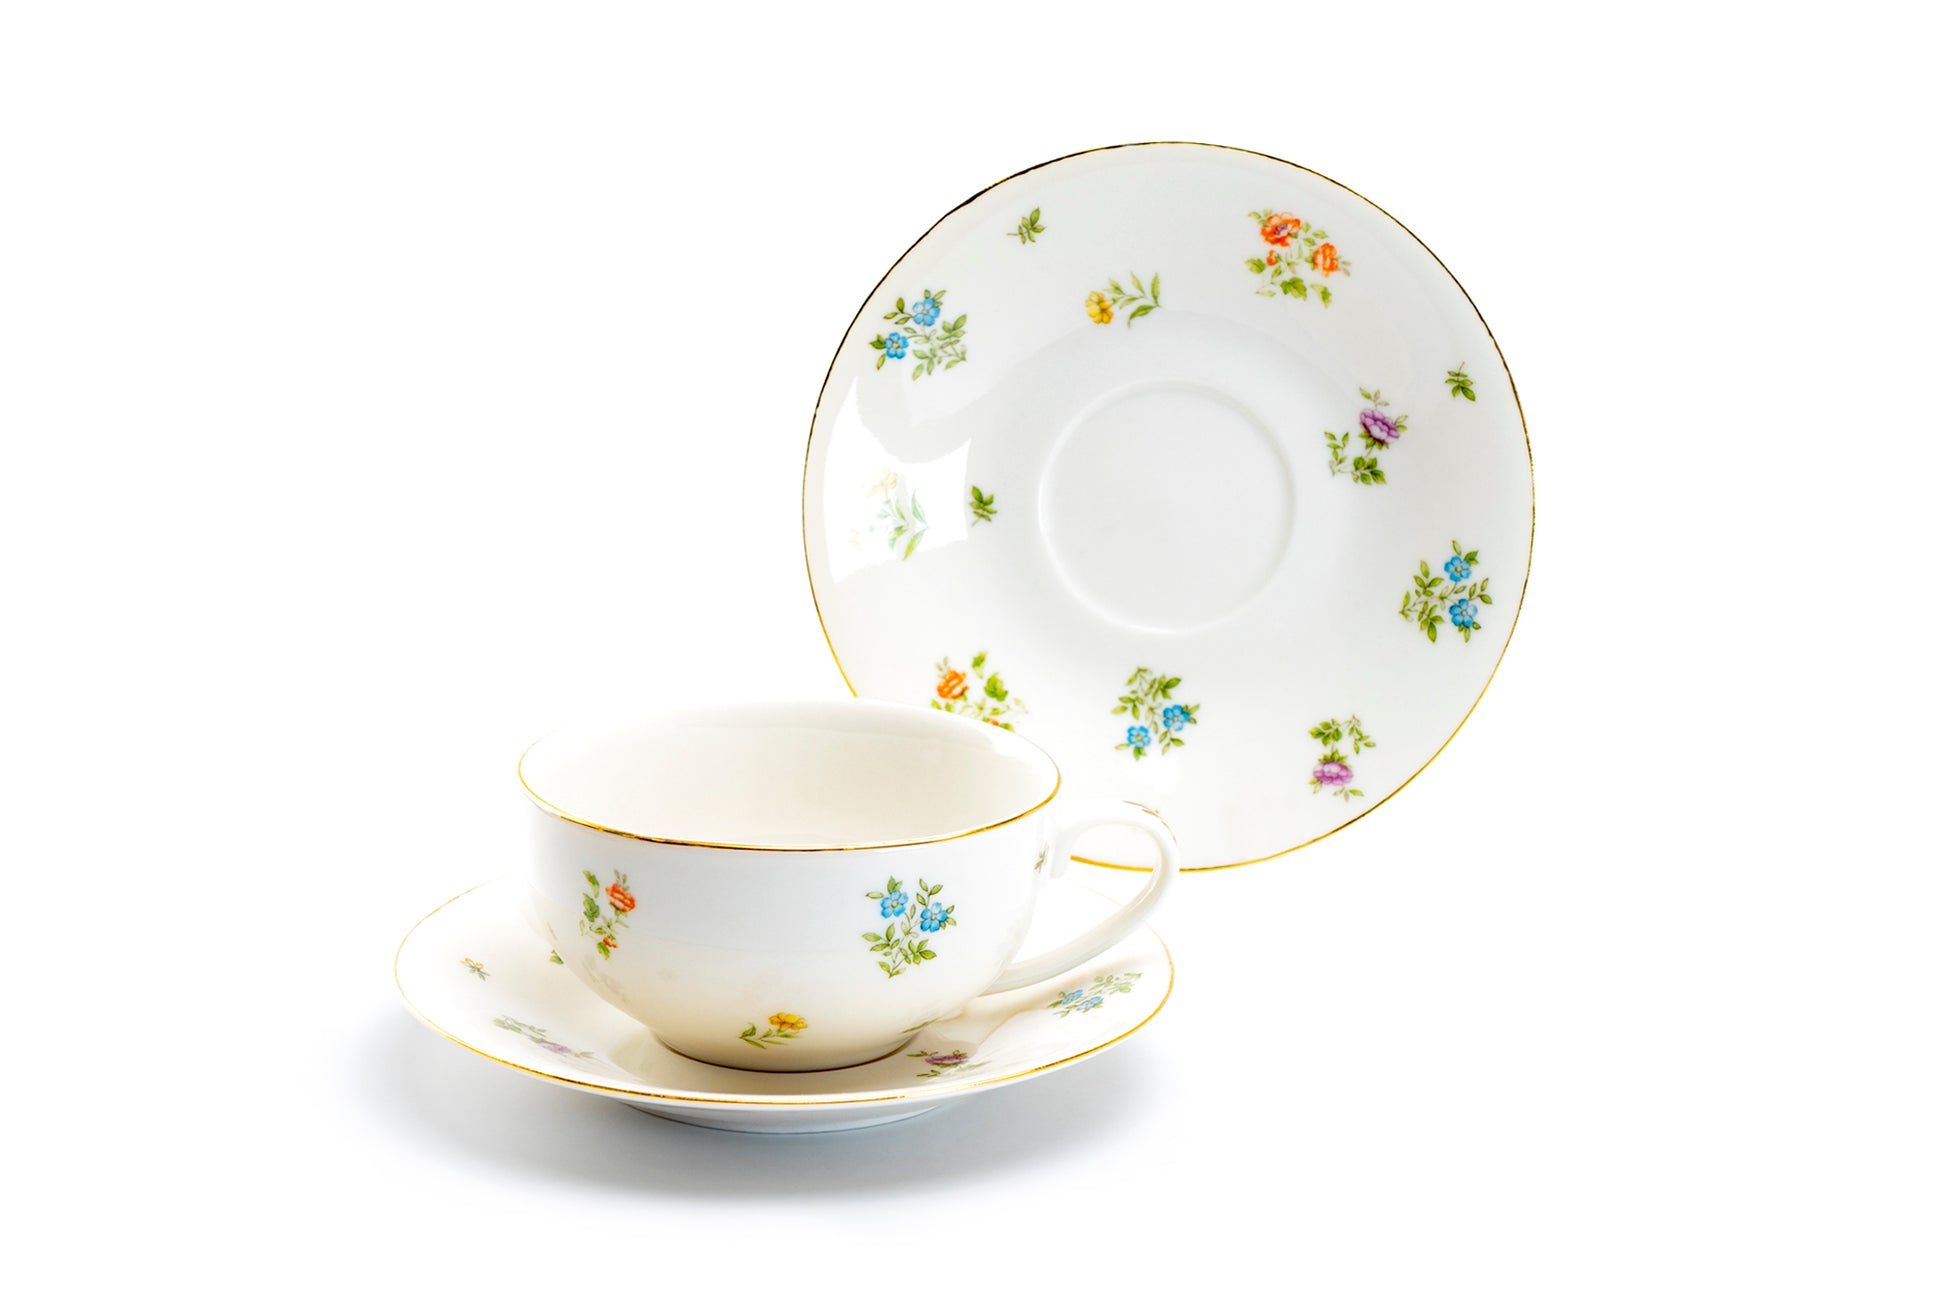 Spring Flowers with Bird Fine Porcelain Latte Cup and Saucer